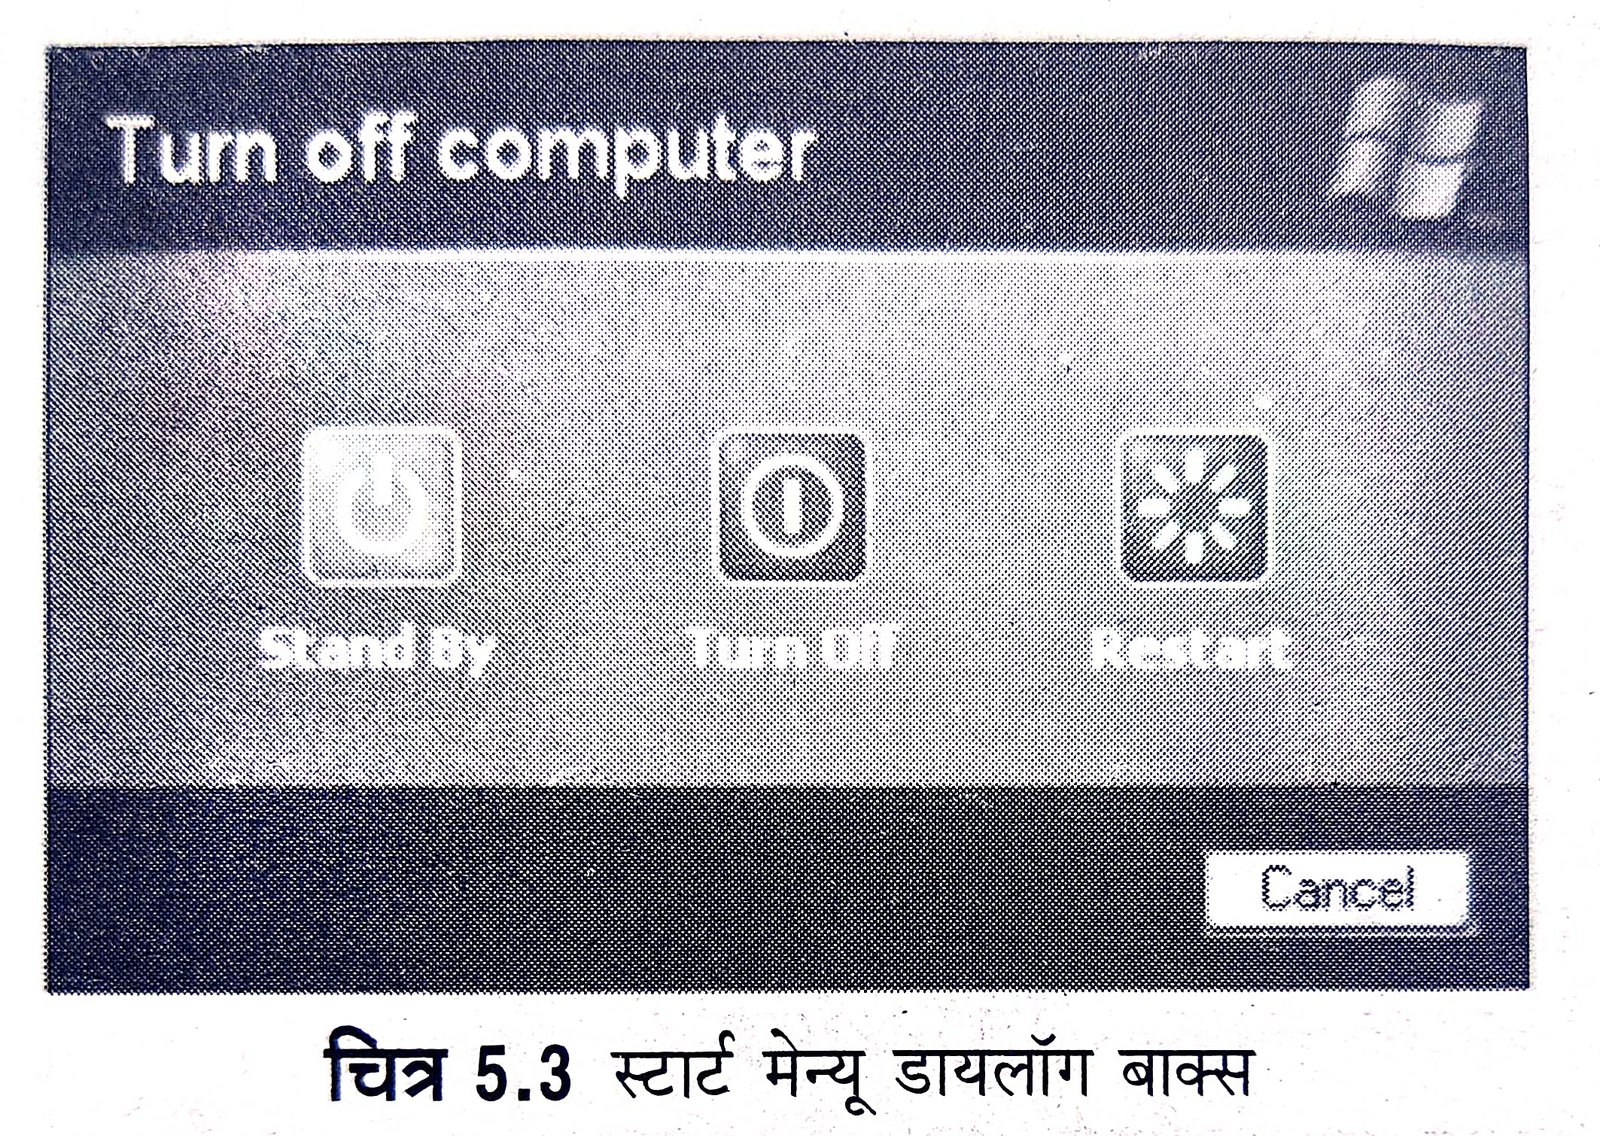 To Close the Computer in Hindi